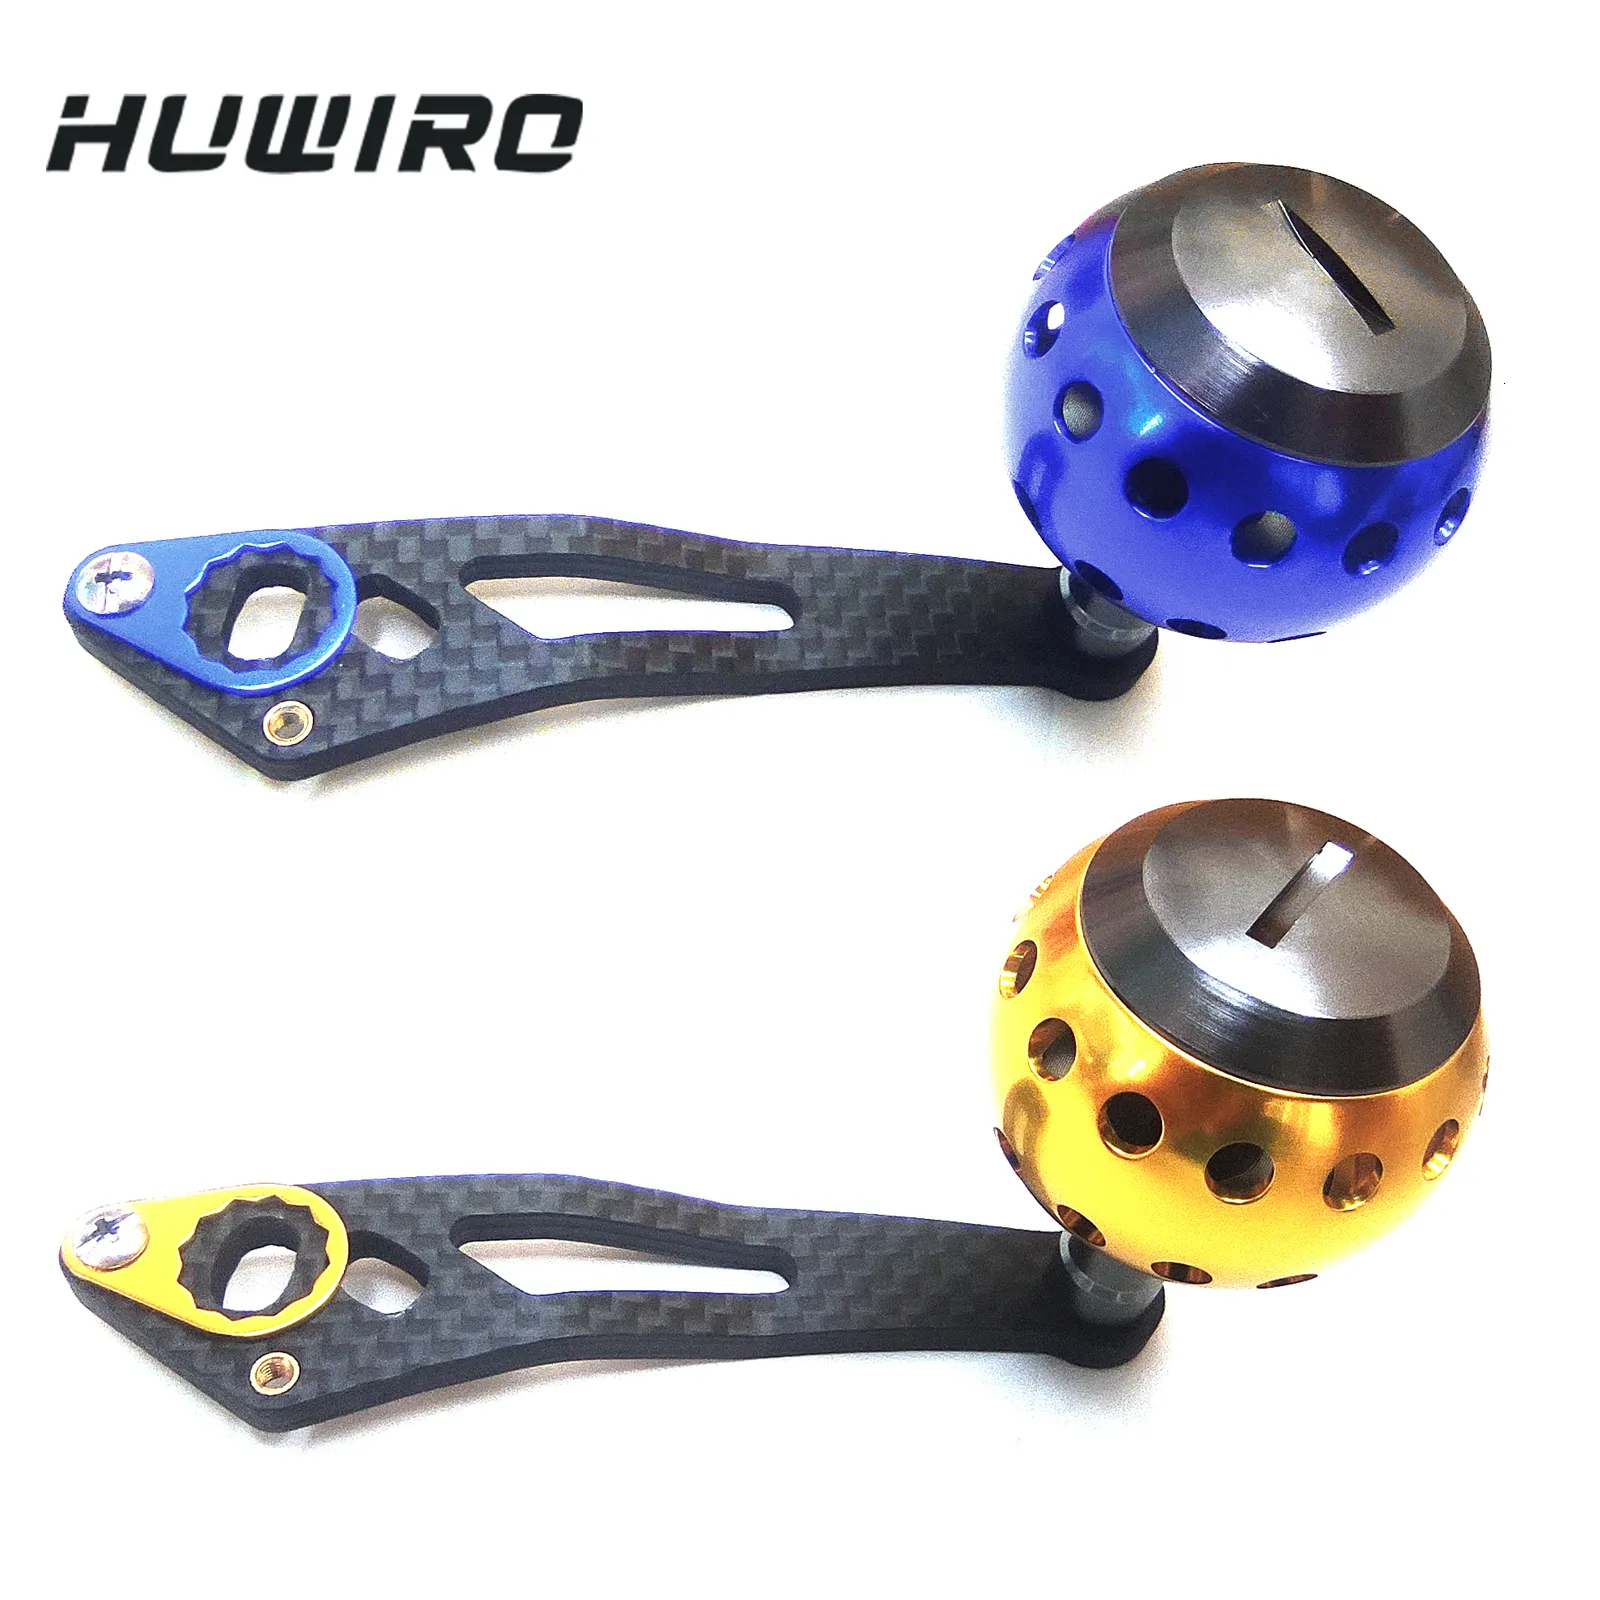 Lightweight Carbon Fiber Fly Fishing Reel With Metal Roller Knob And  Singlegrip 30g For Baitcasting And DIY Accessories Model: 230912 From Hu09,  $15.92